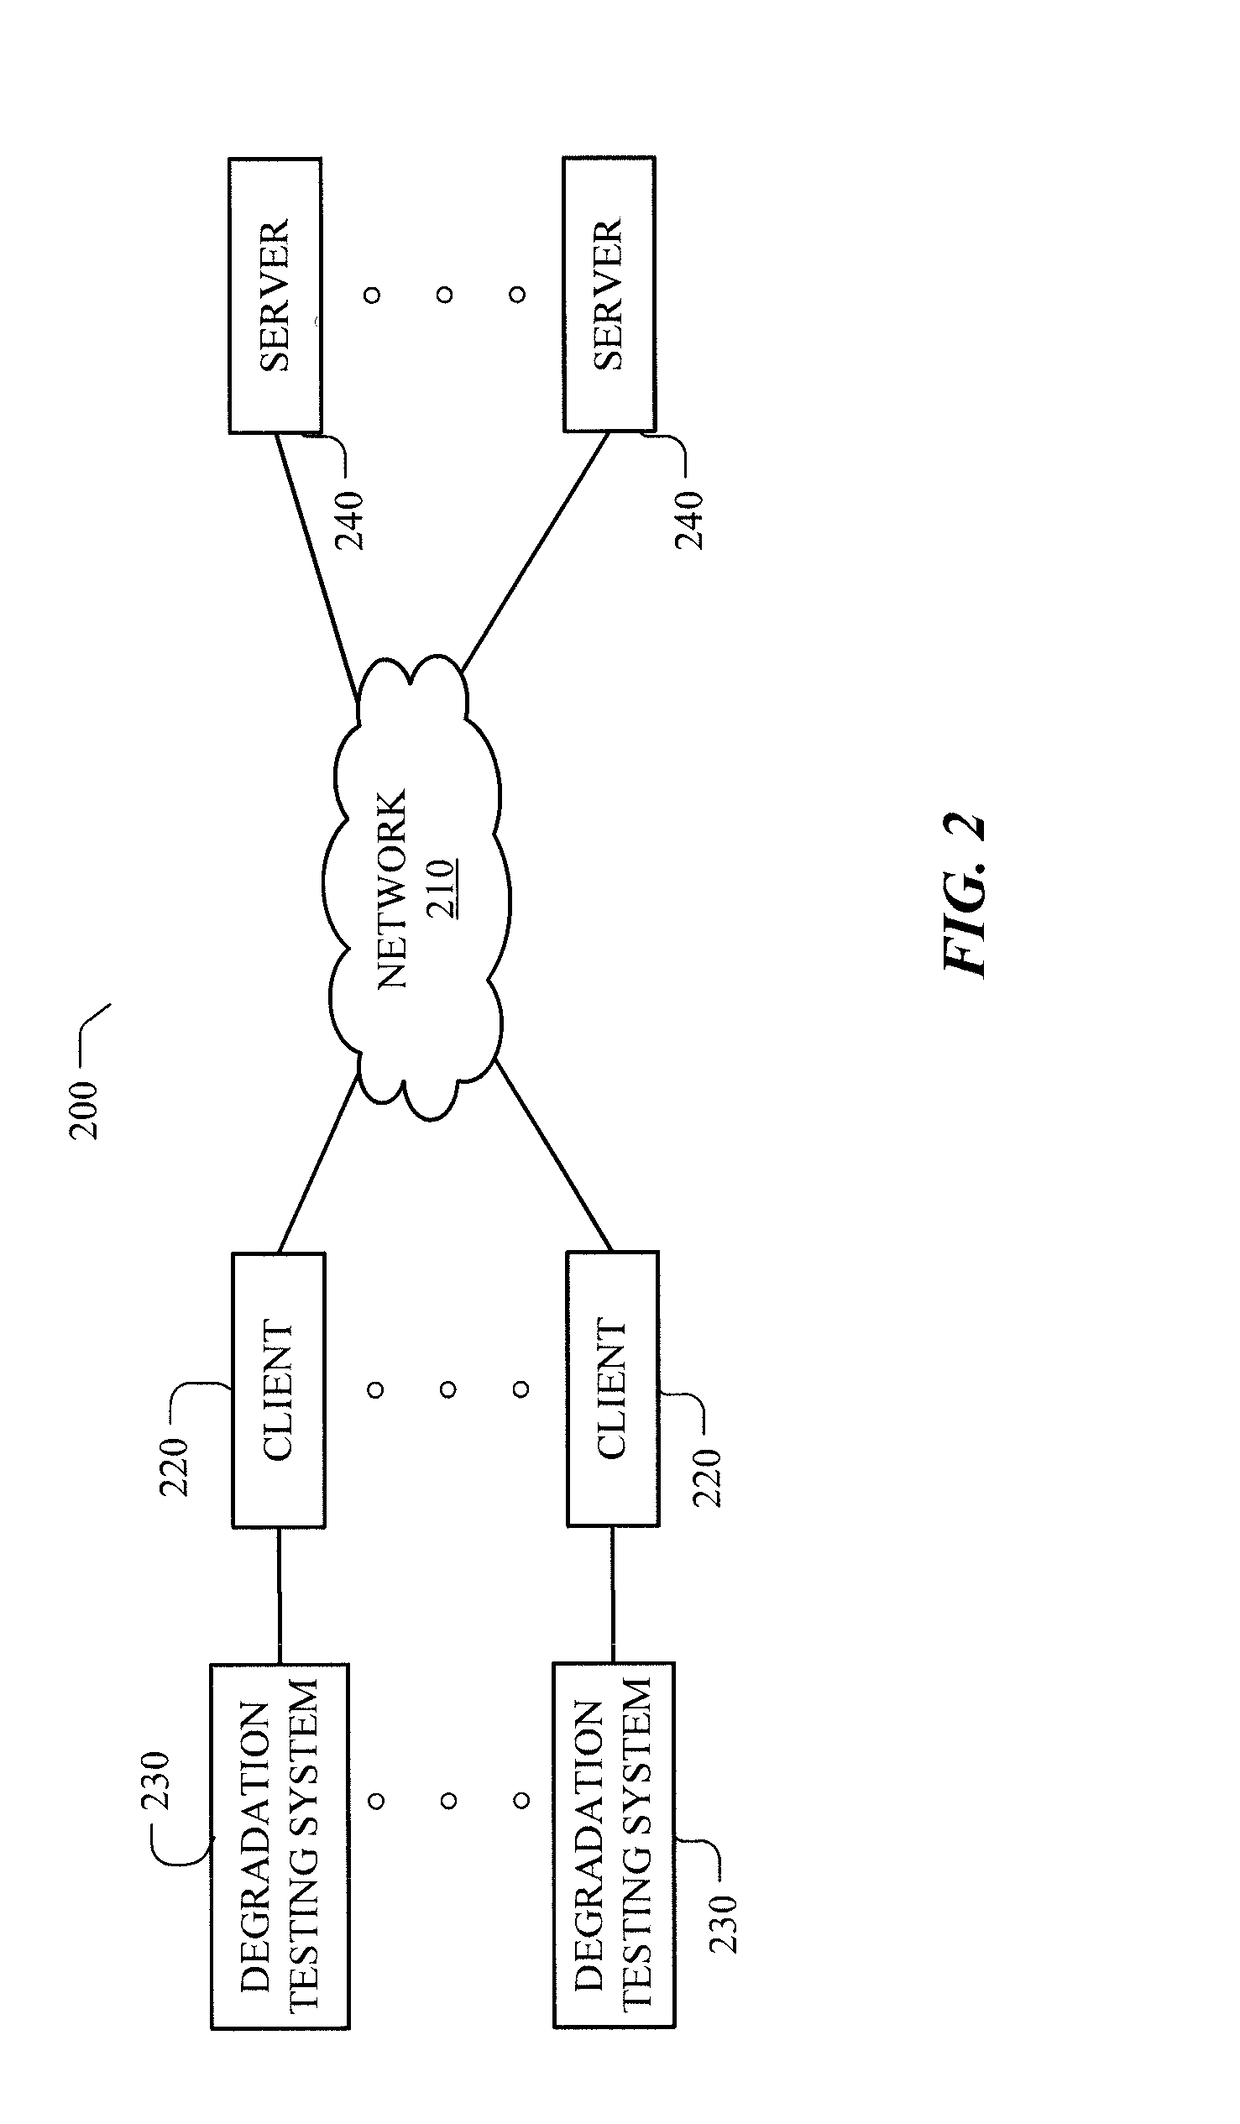 System and method for testing photosensitive device degradation